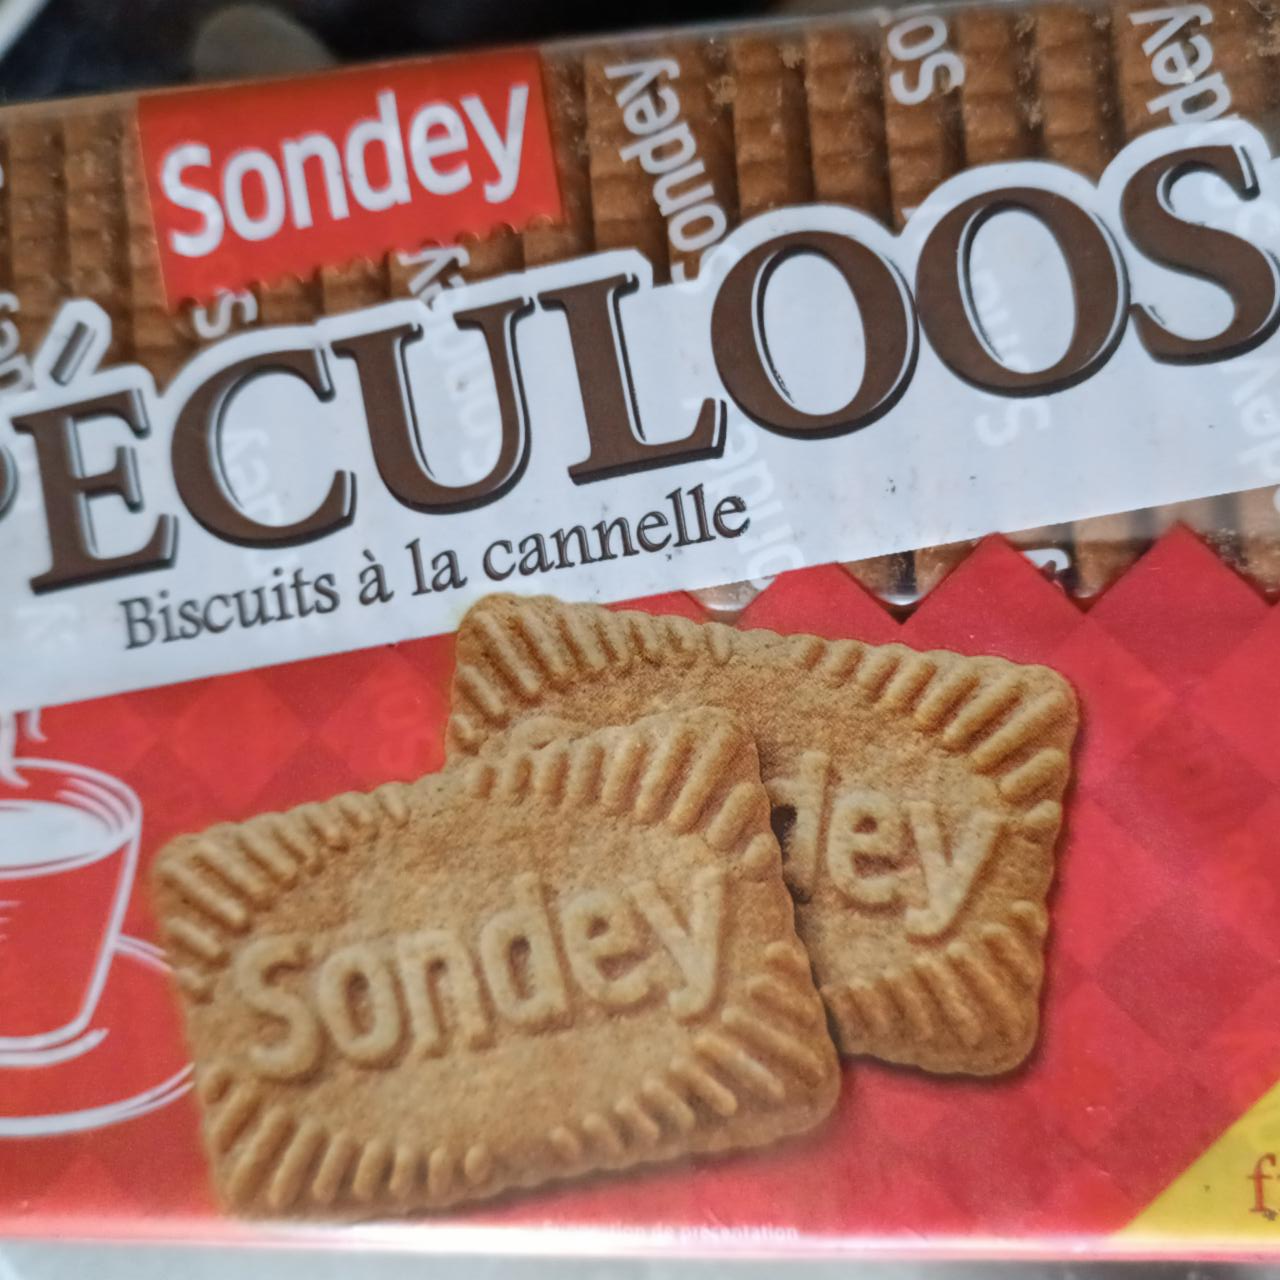 Фото - Печиво Speculoos Biscuits A La Cannelle Sondey